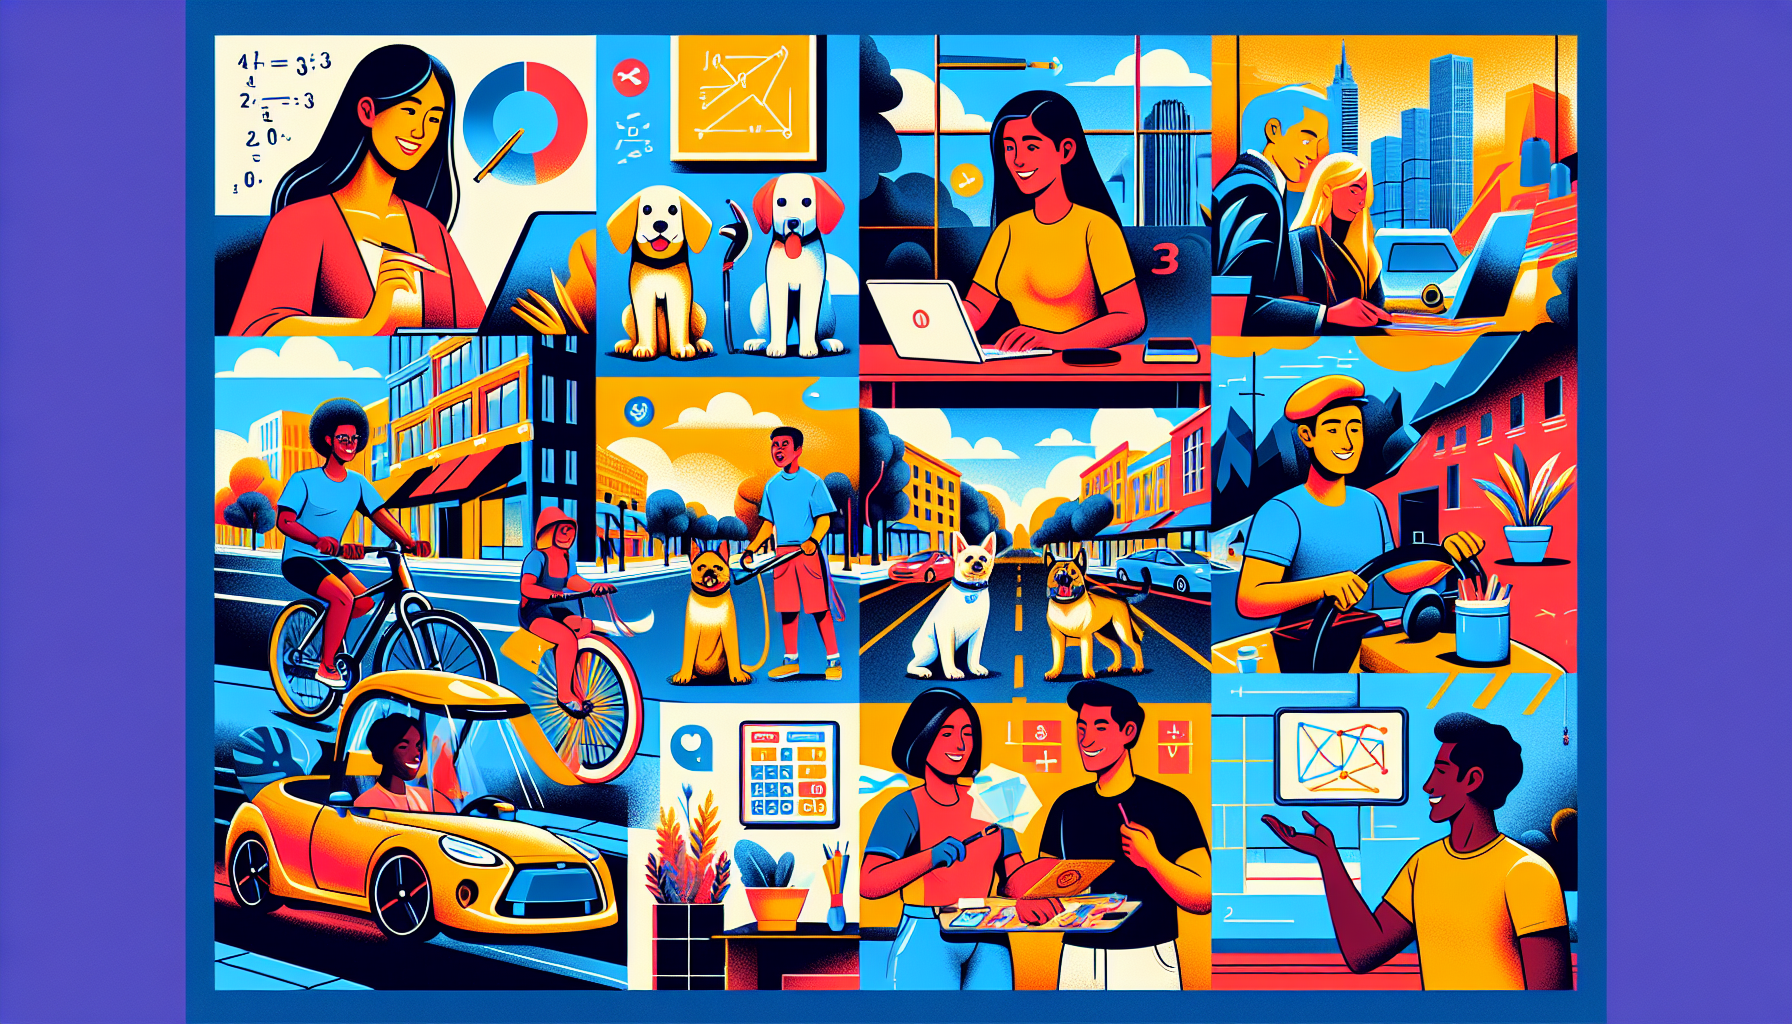 Create an illustration depicting 10 diverse people each engaging in various side jobs such as freelancing online, dog walking, ridesharing, tutoring, selling handmade crafts, renting out a room, food delivery, fitness coaching, virtual assistant, and photography. Each person is actively working in a different vibrant setting, showcasing the hustle and creativity of side jobs.